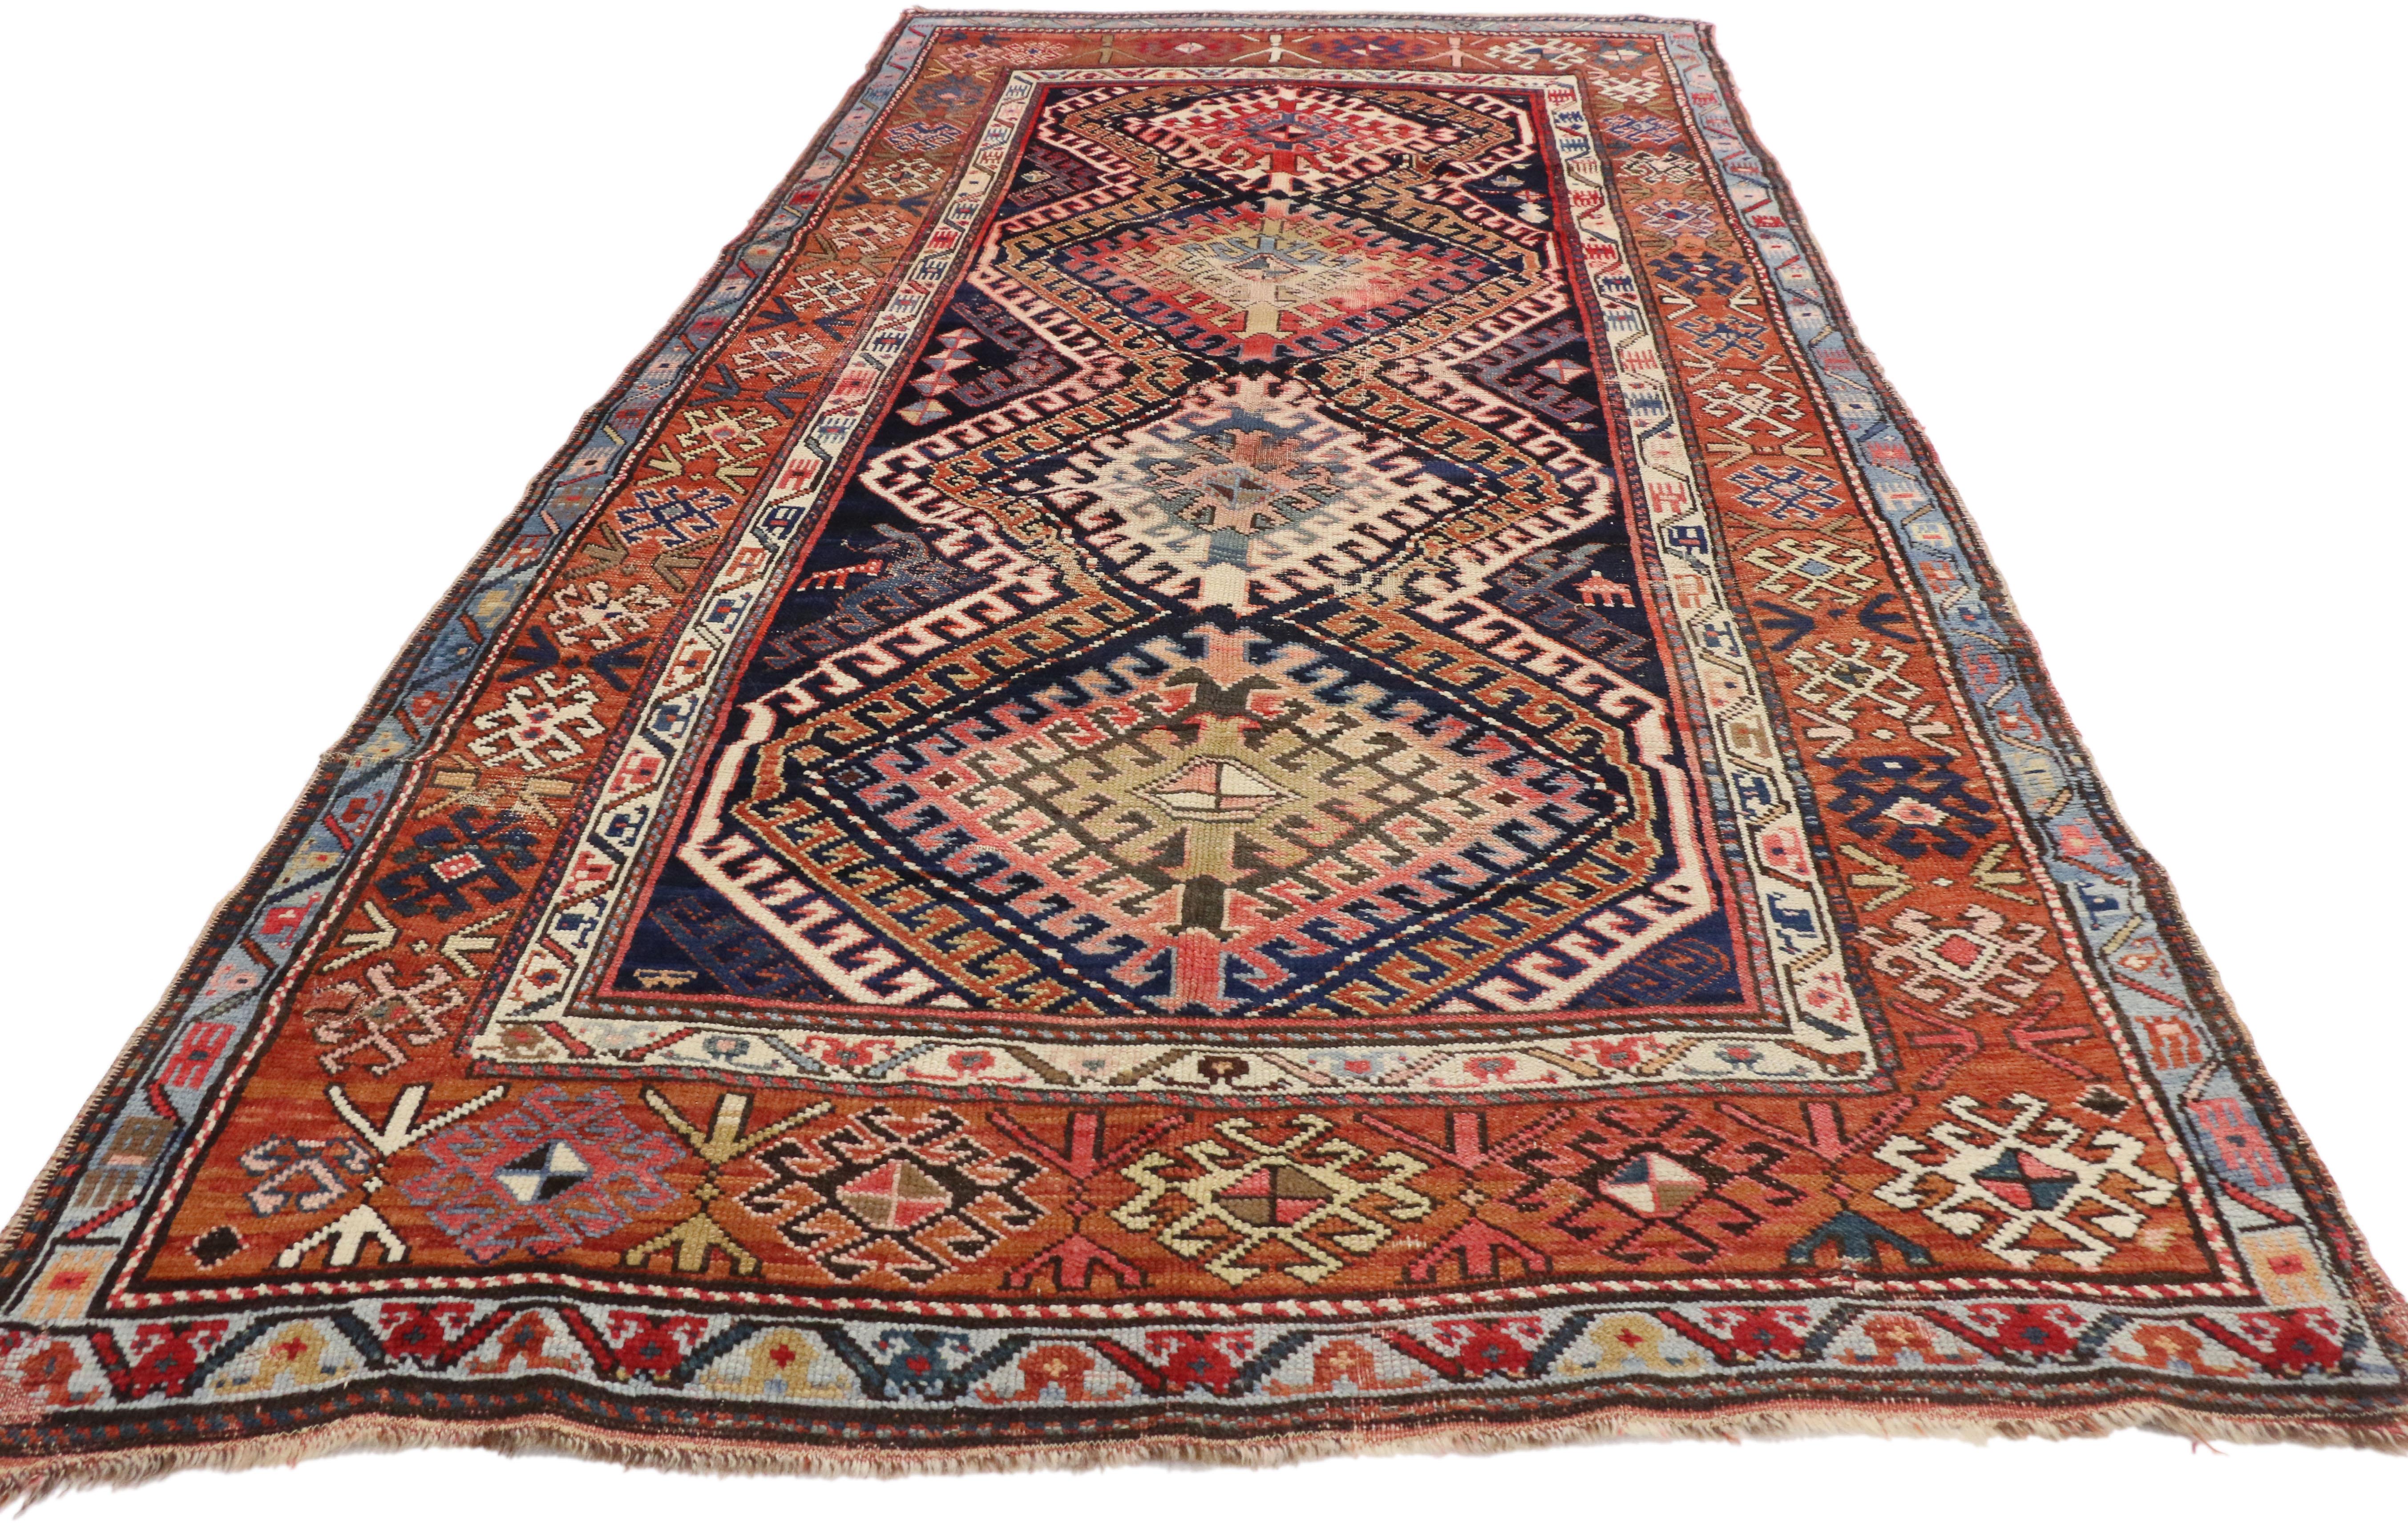 Hand-Knotted Rustic Tribal Style Antique Caucasian Bordjalou Kazak Rug, Wide Hallway Runner For Sale